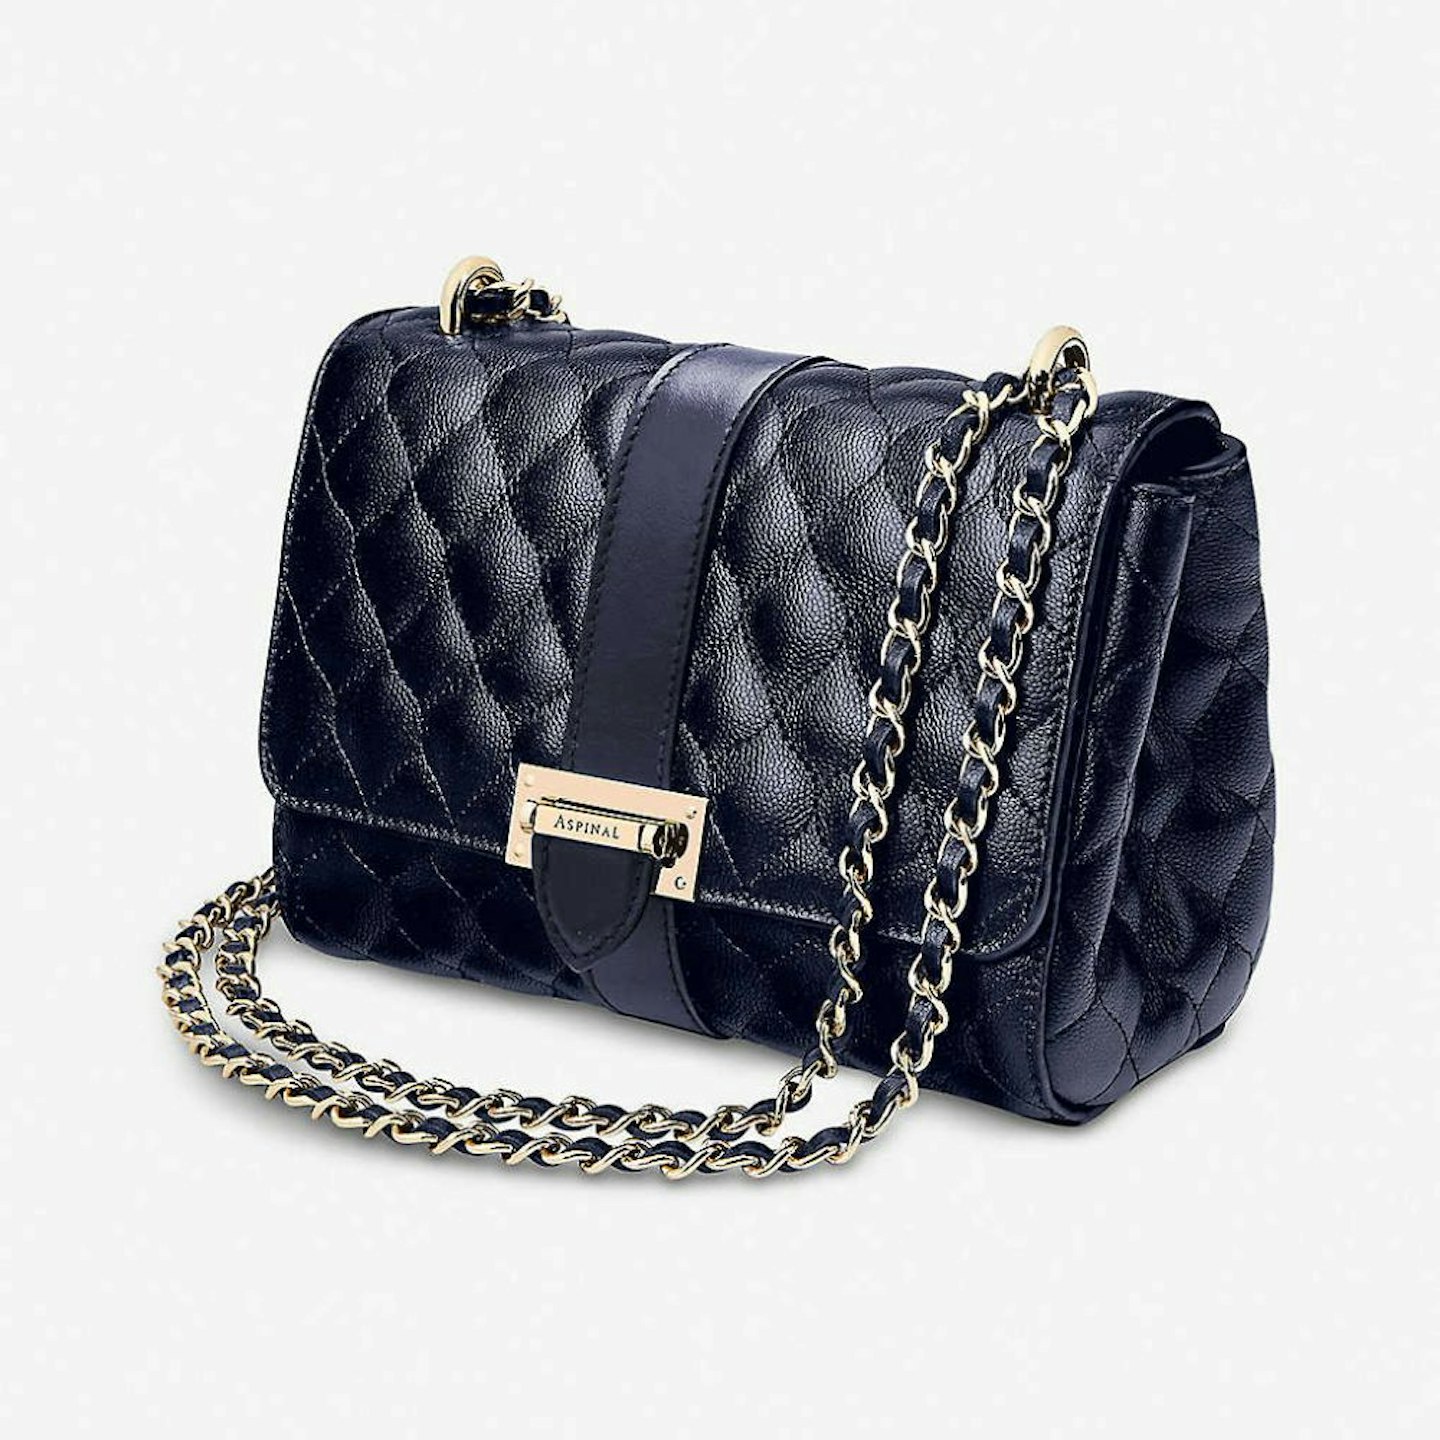 ASPINAL OF LONDON Lottie quilted leather shoulder bag